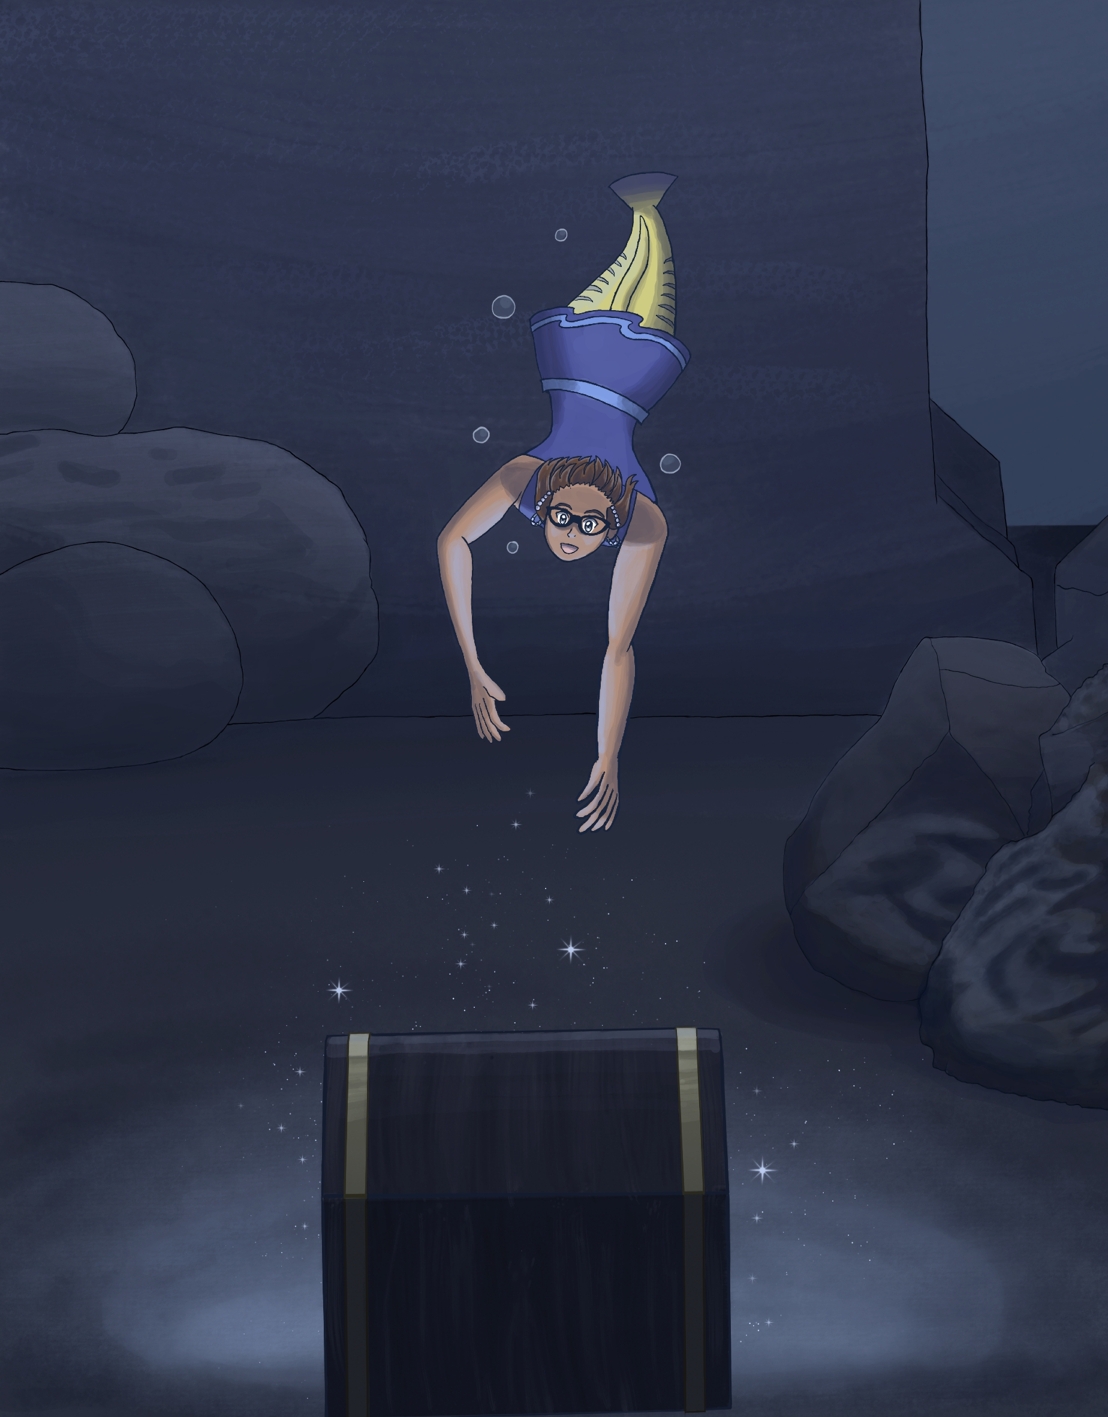 Image description: A digital painting of a mermaid wearing a blue early 20th century-style swimsuit. She wears a masquerade-style mask and has a yellow fish tail. She is reaching towards an open treasure chest that emits a blue light and sparkles. Behind her are tall underwater rock formations. 